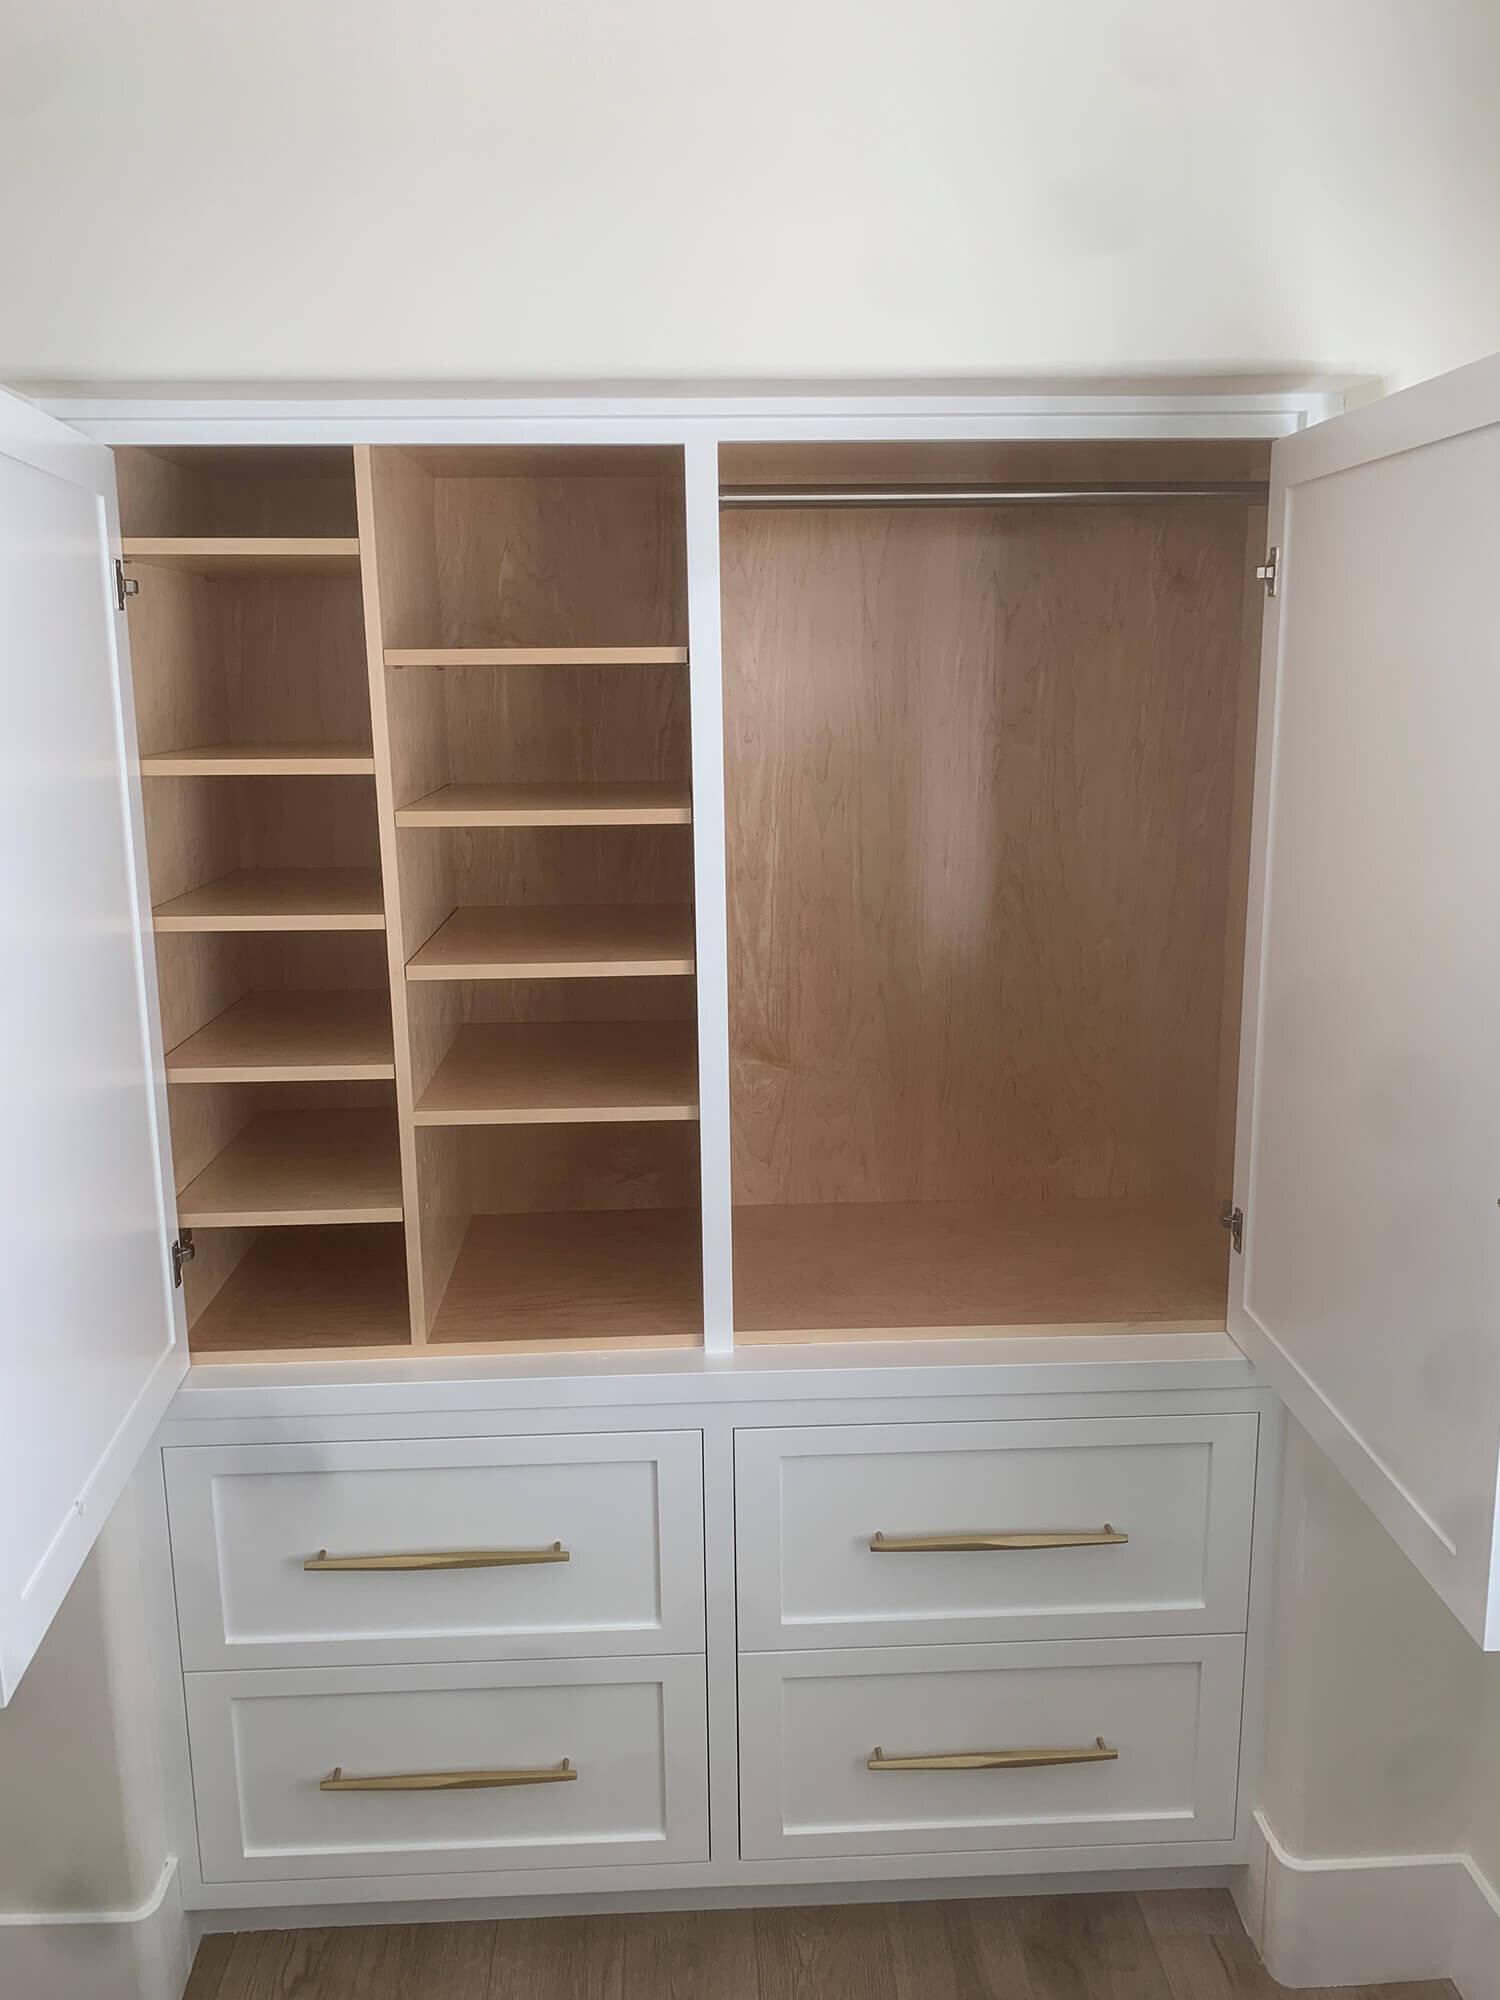 Custom-Closet-built-in-with-drawers-open-white-1500x2000.jpg